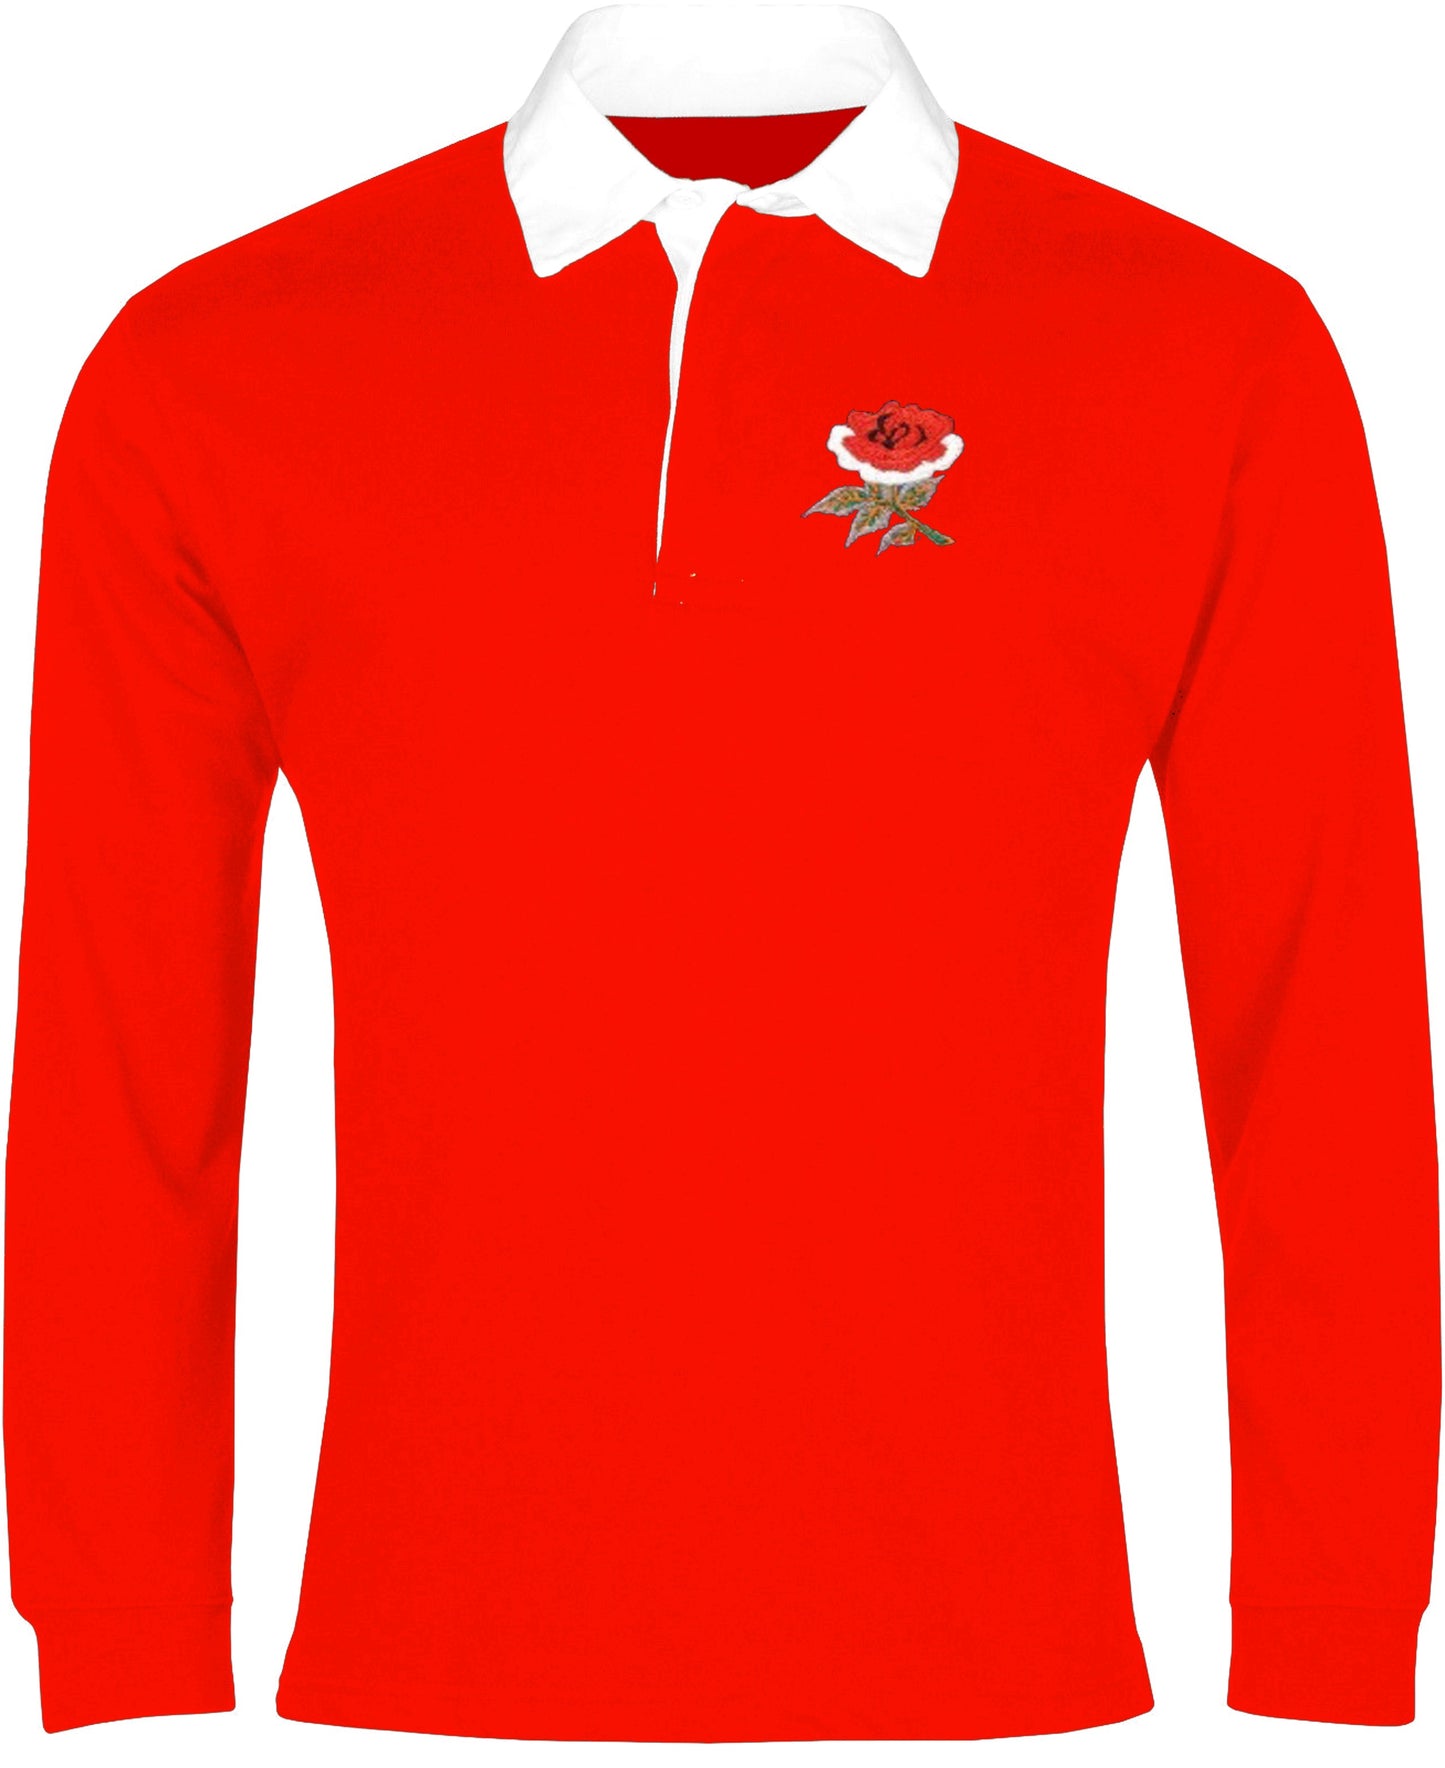 England Retro Rugby Shirt 1910 Long-sleeved - Rugby Shirt